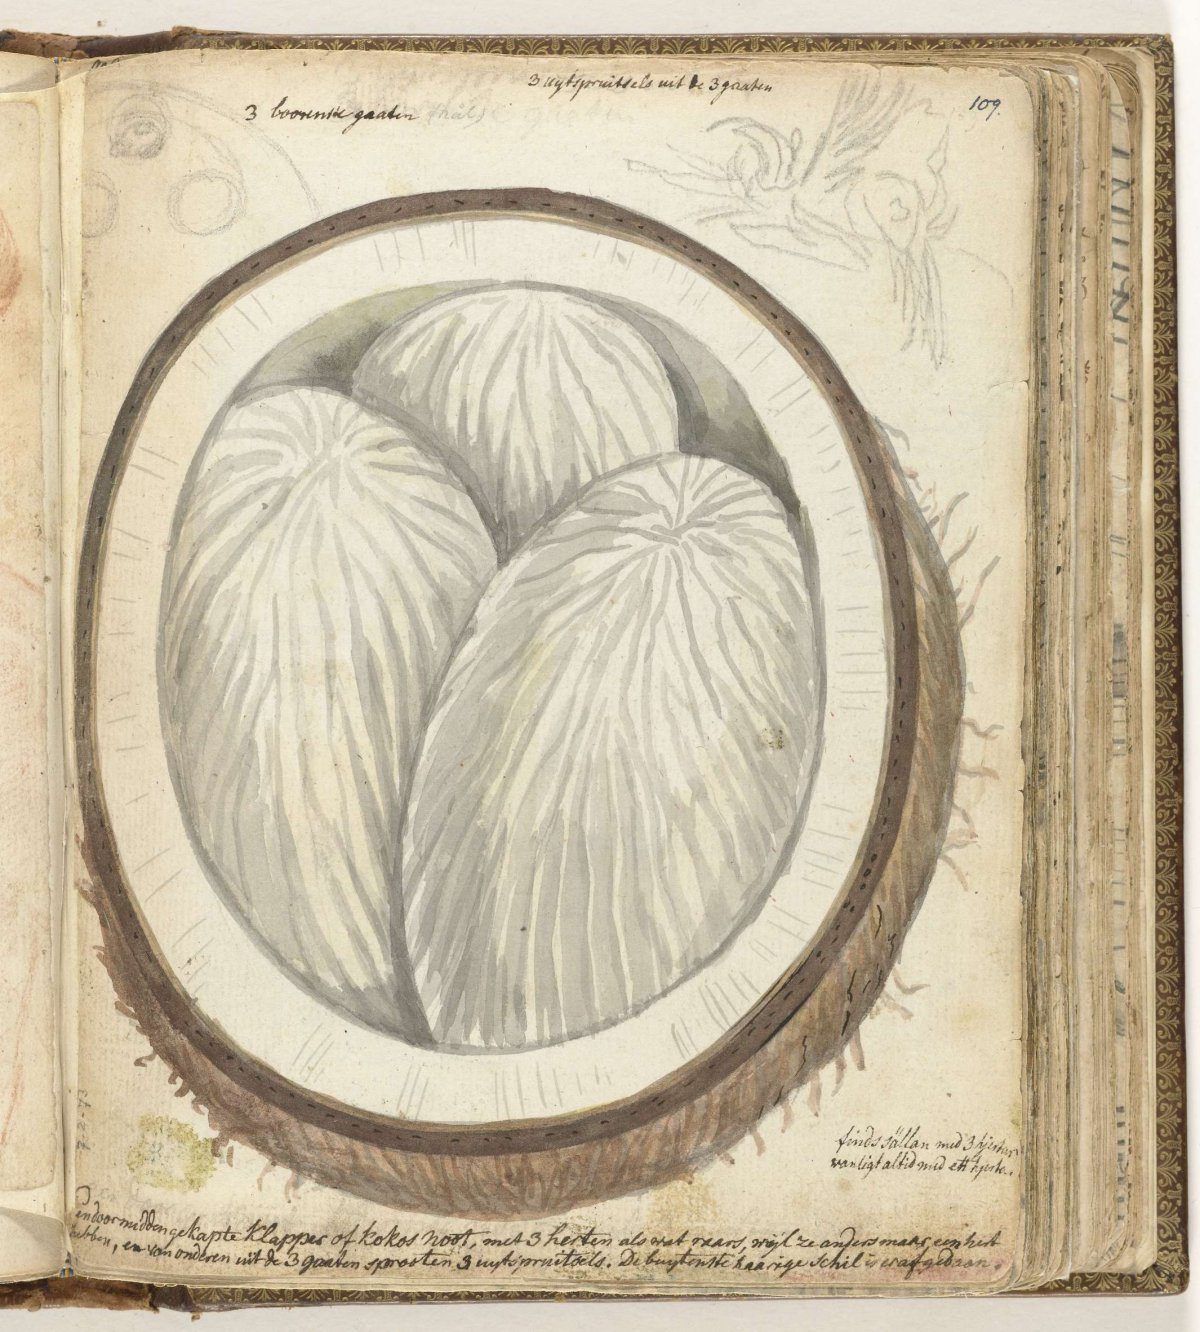 Coconut with three hearts, Jan Brandes, 1779 - 1785